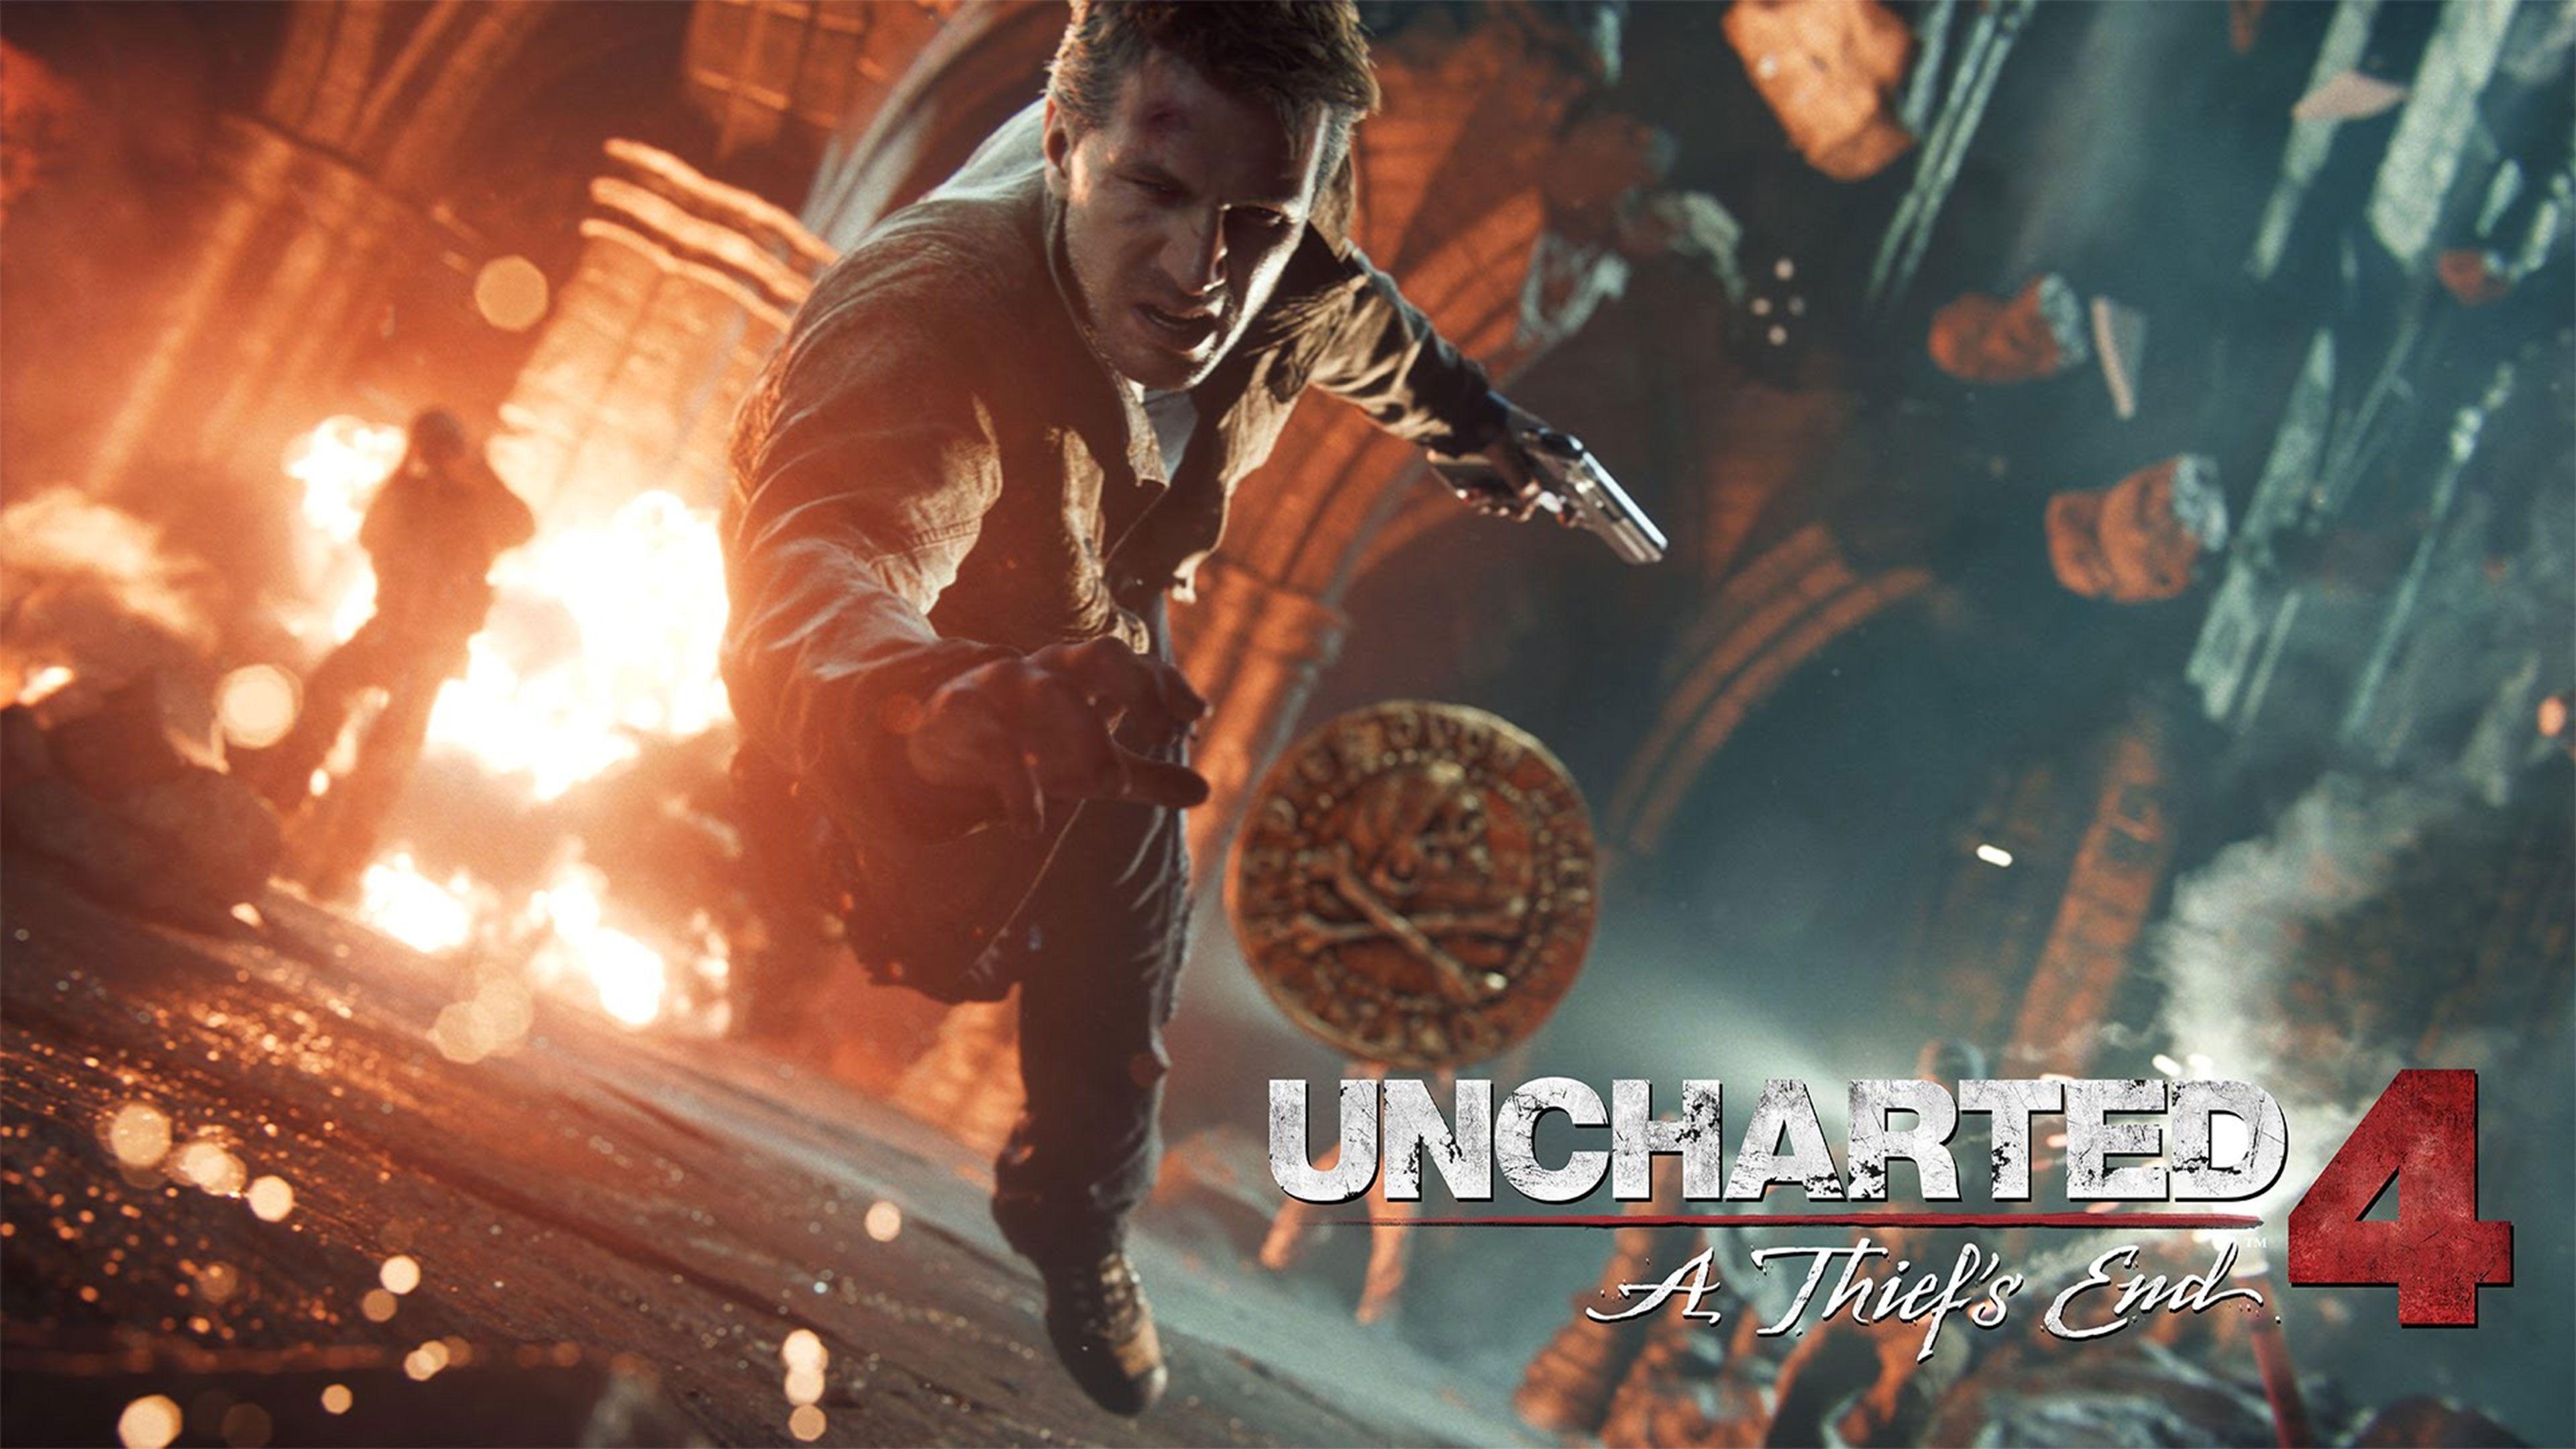 Uncharted 4: A Thief&;s End Wallpaper in Ultra HDK